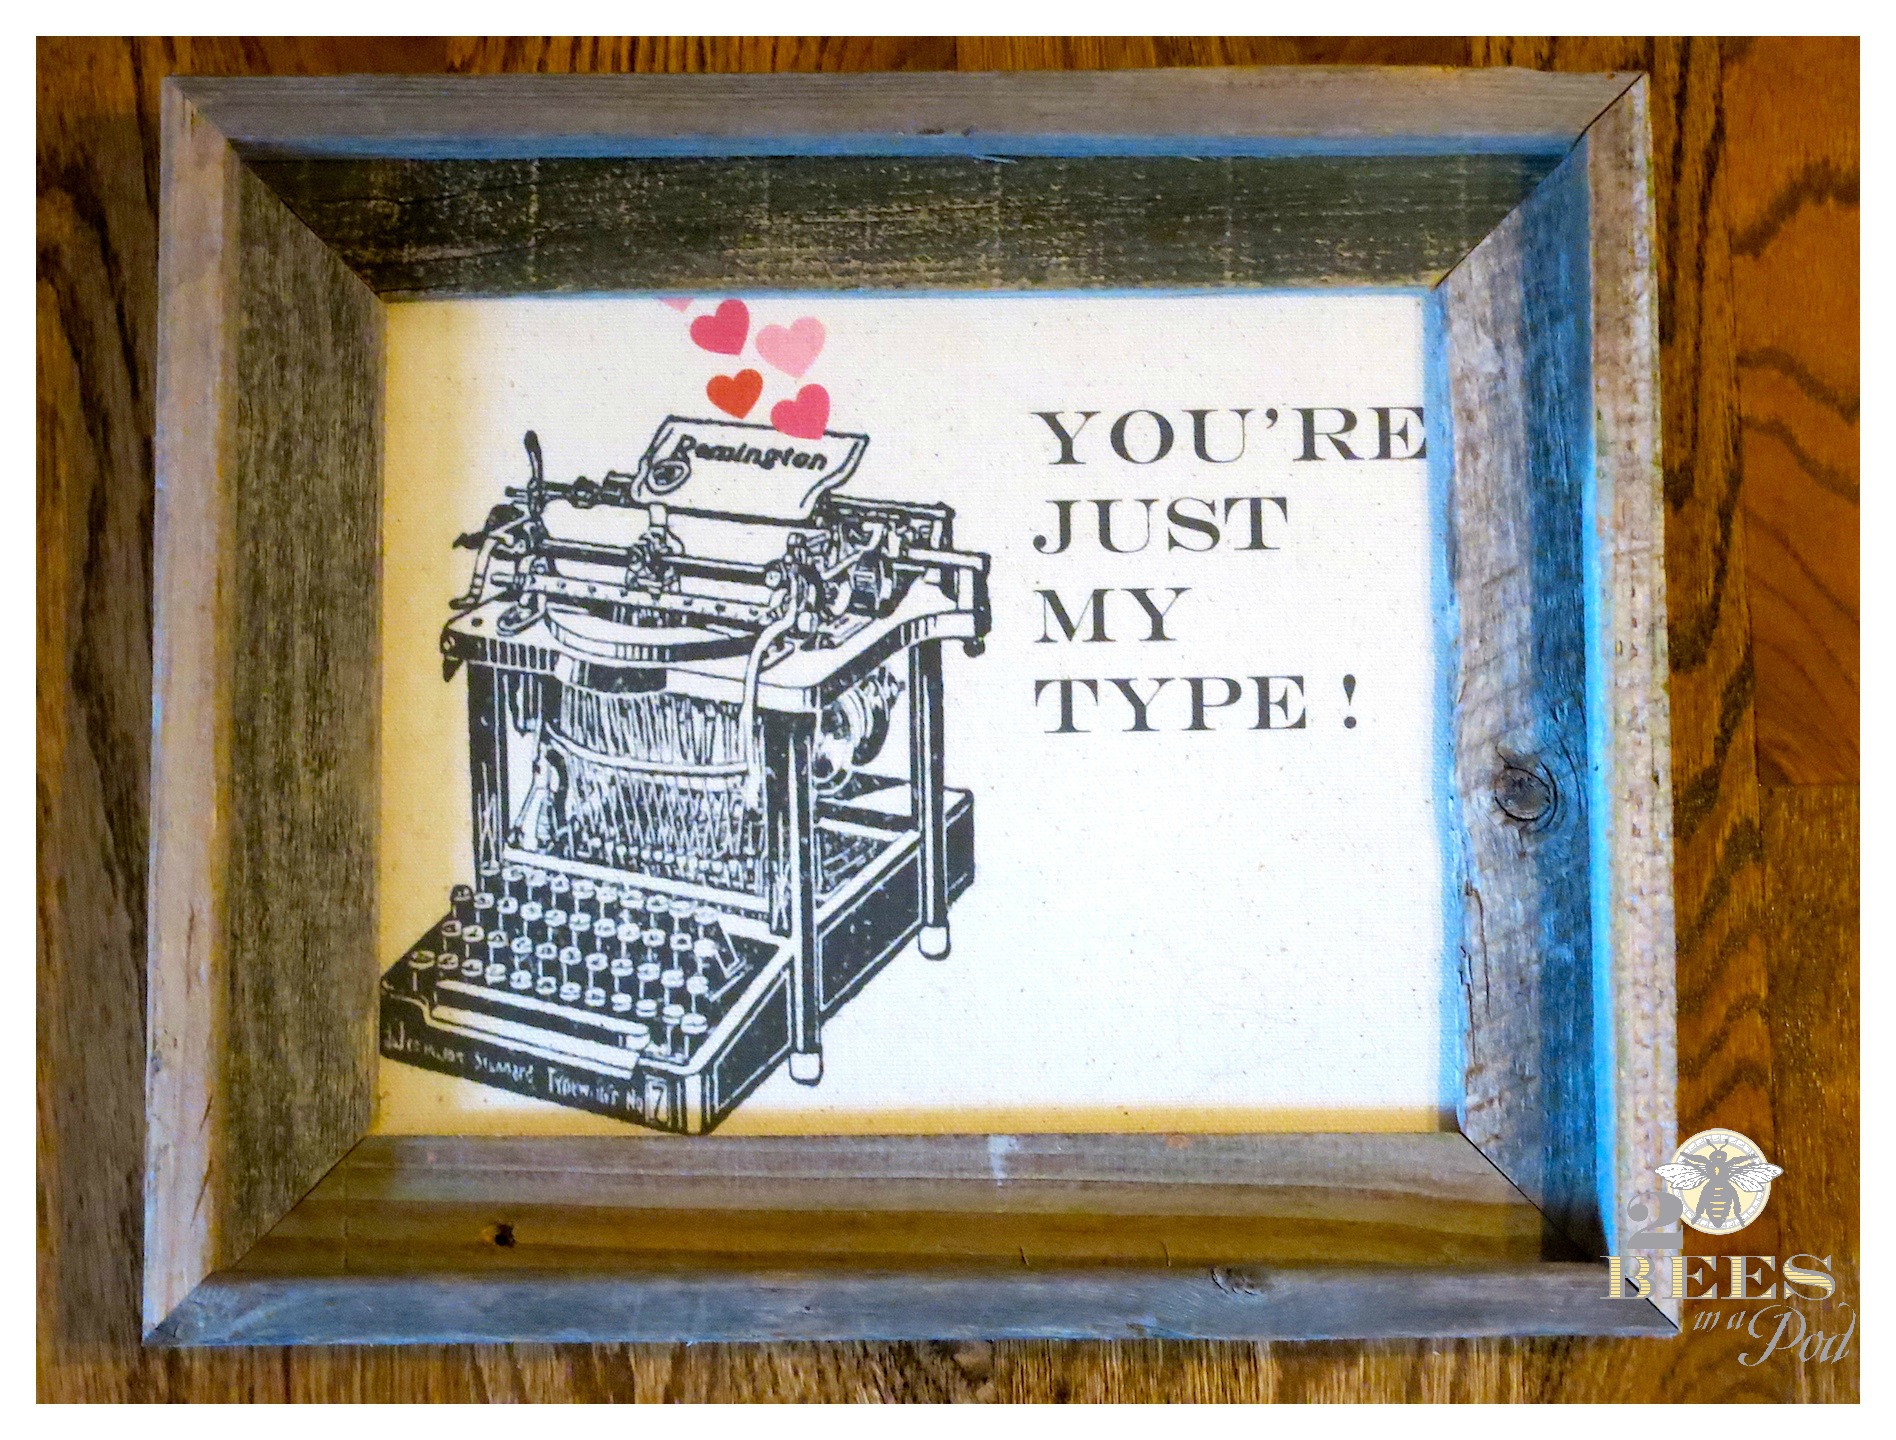 Valentine message printed on fabric and placed in a rustic frame. Graphics of a vintage typewriter "You're Just My Type"